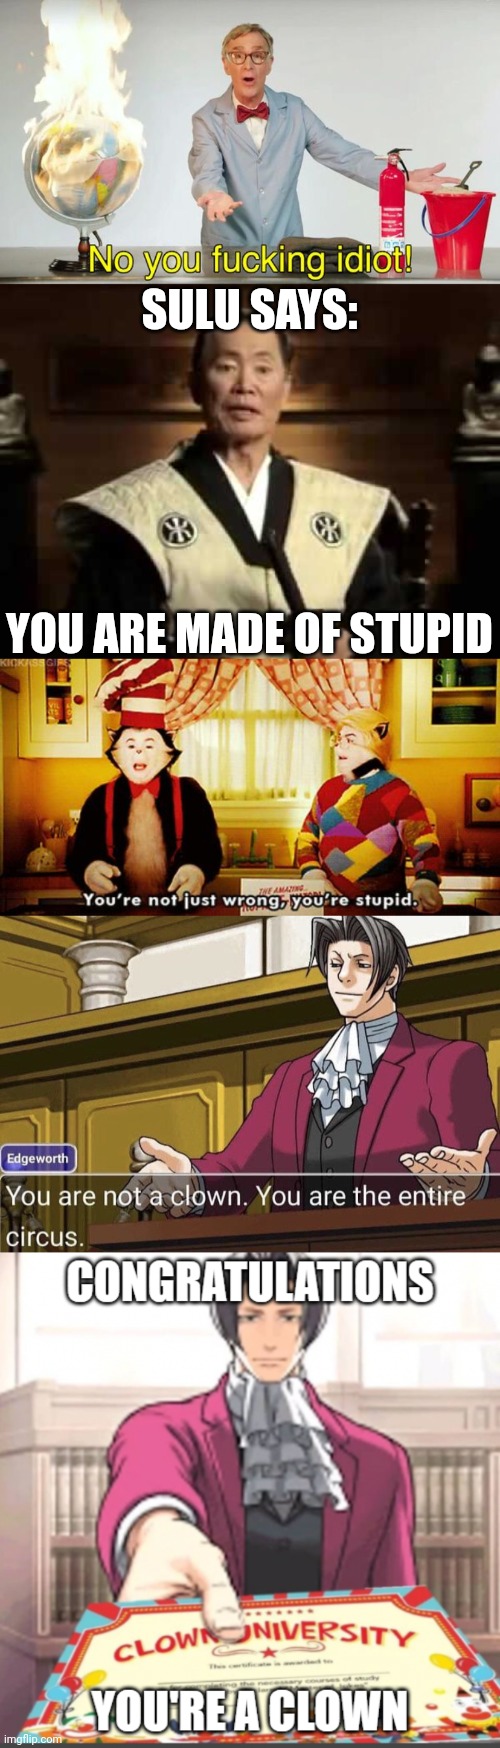 SULU SAYS: YOU ARE MADE OF STUPID | image tagged in no you f cking idiot,you are made of stupid,you're not just wrong you're stupid,you're not a clown you're the entire circus | made w/ Imgflip meme maker